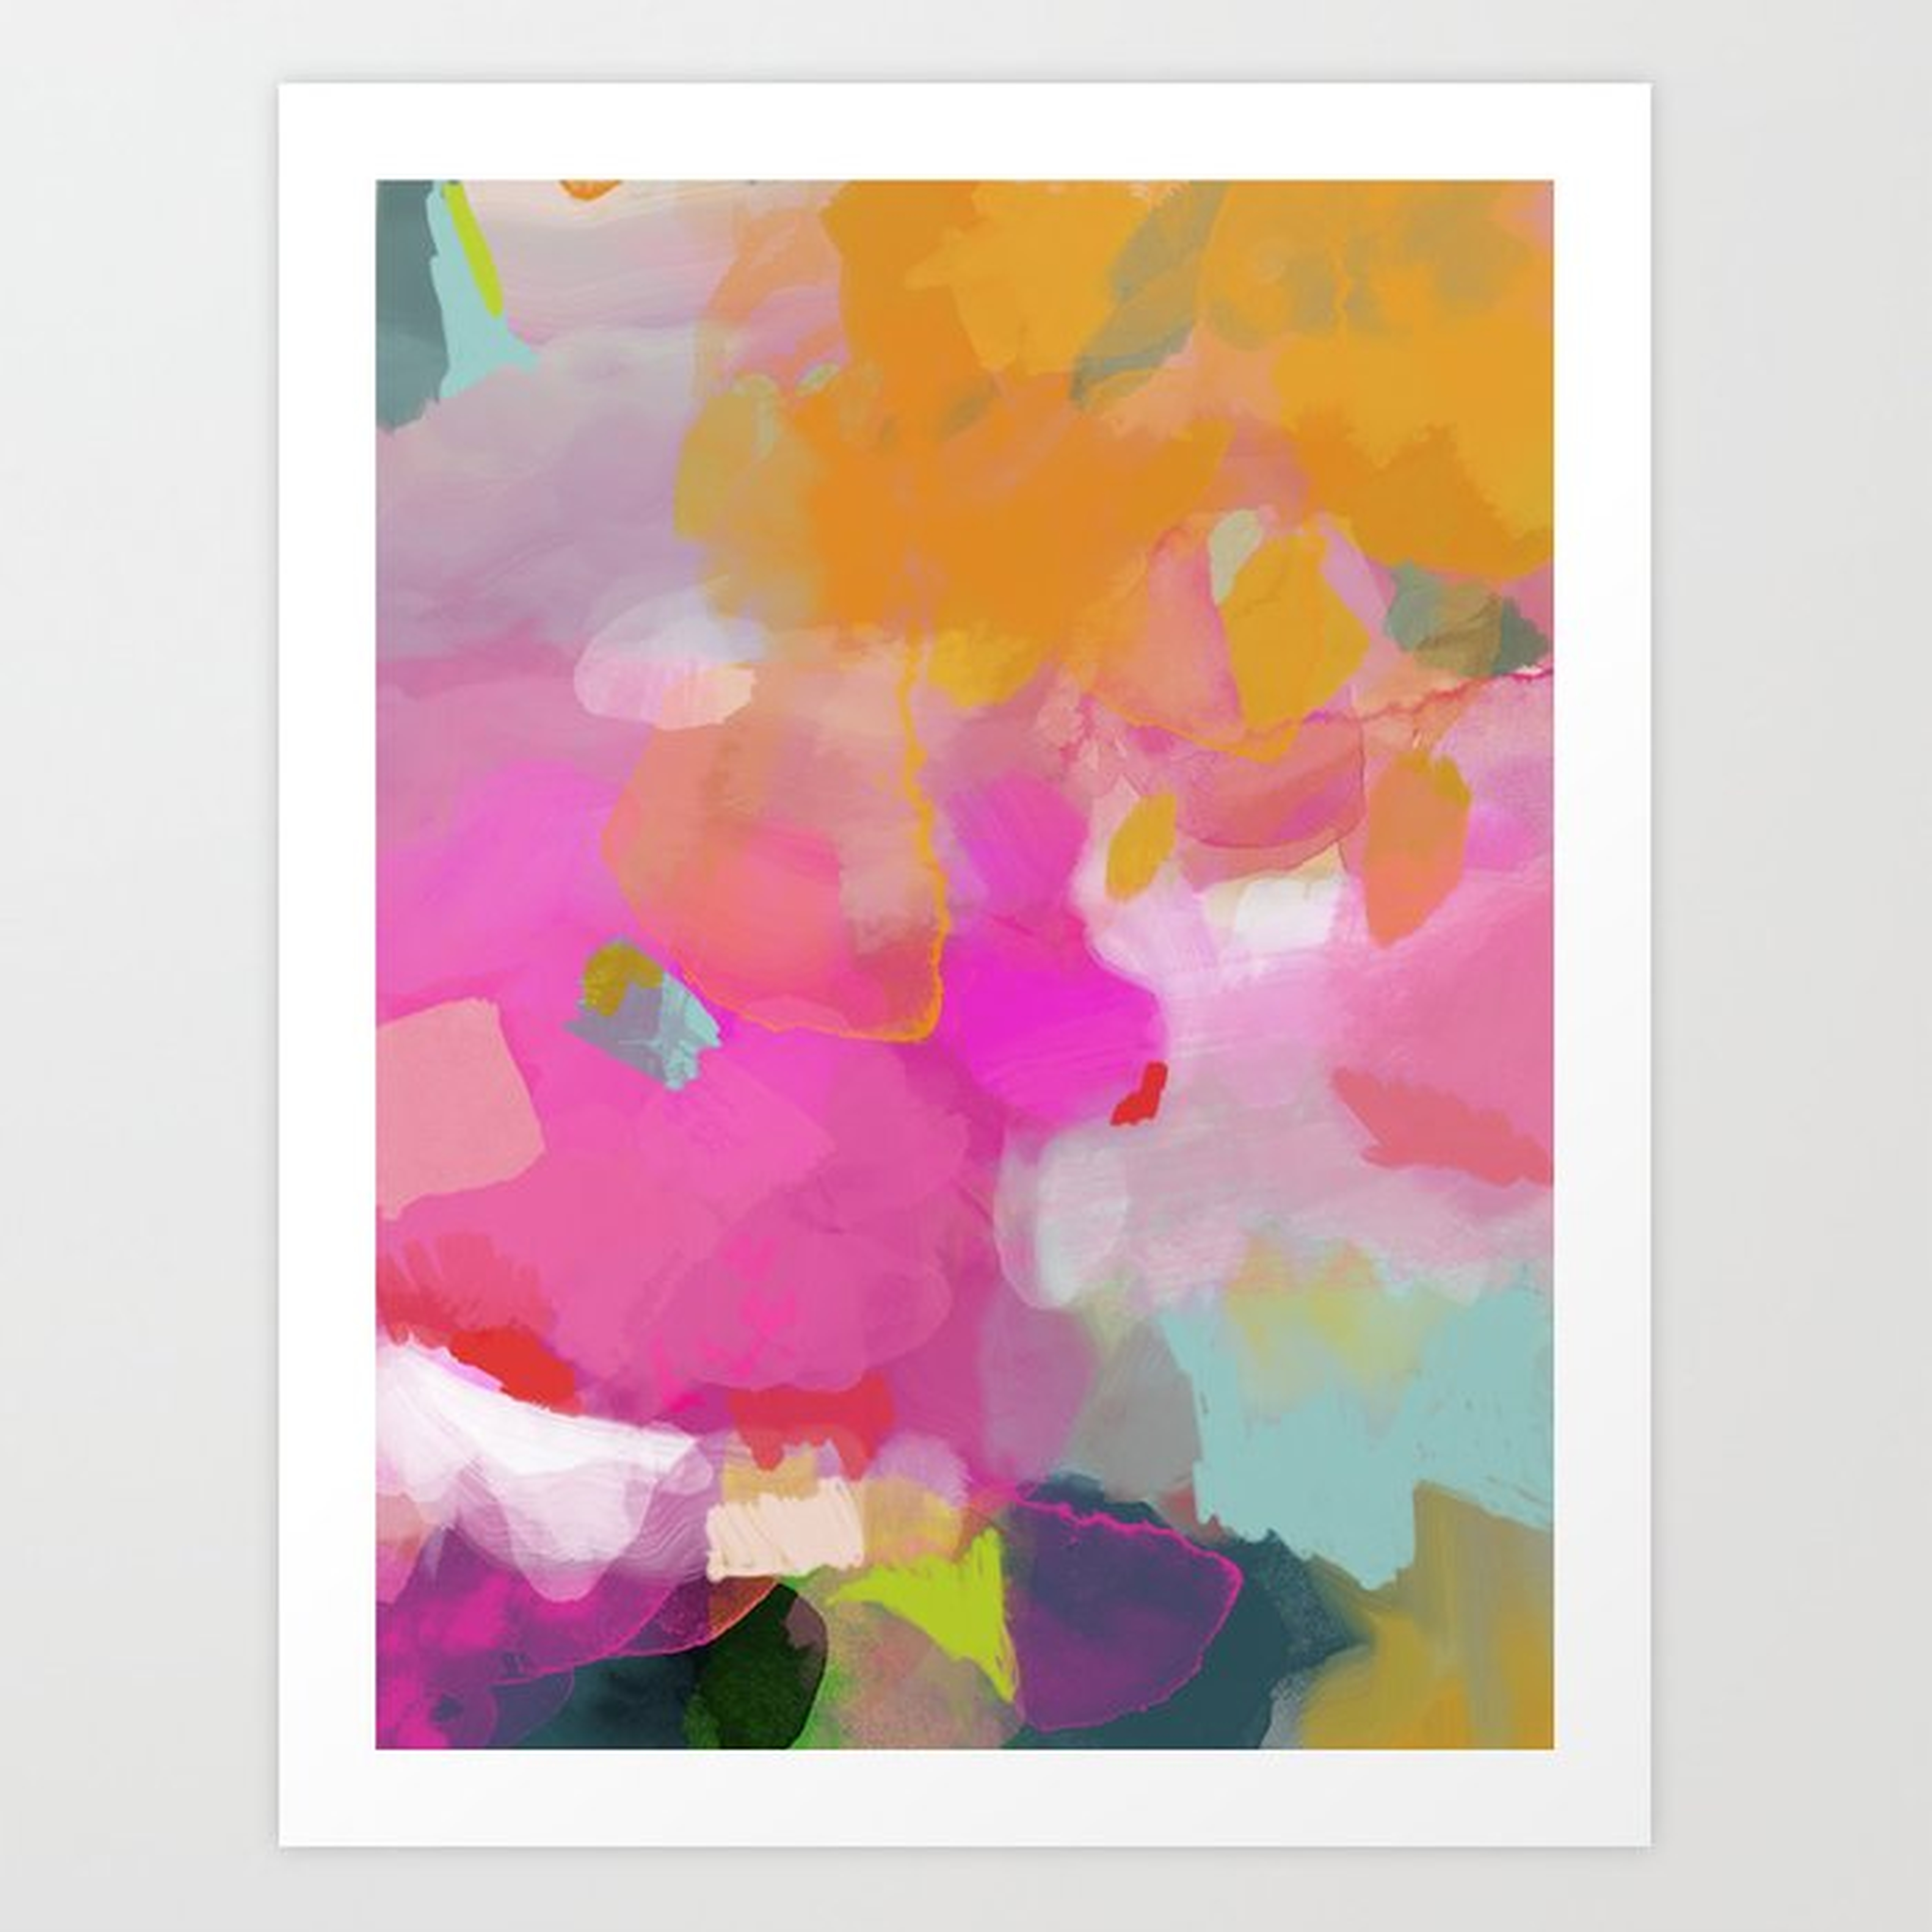 pink sun clouds abstract Art Print - Large - 22 x 28 - Society6